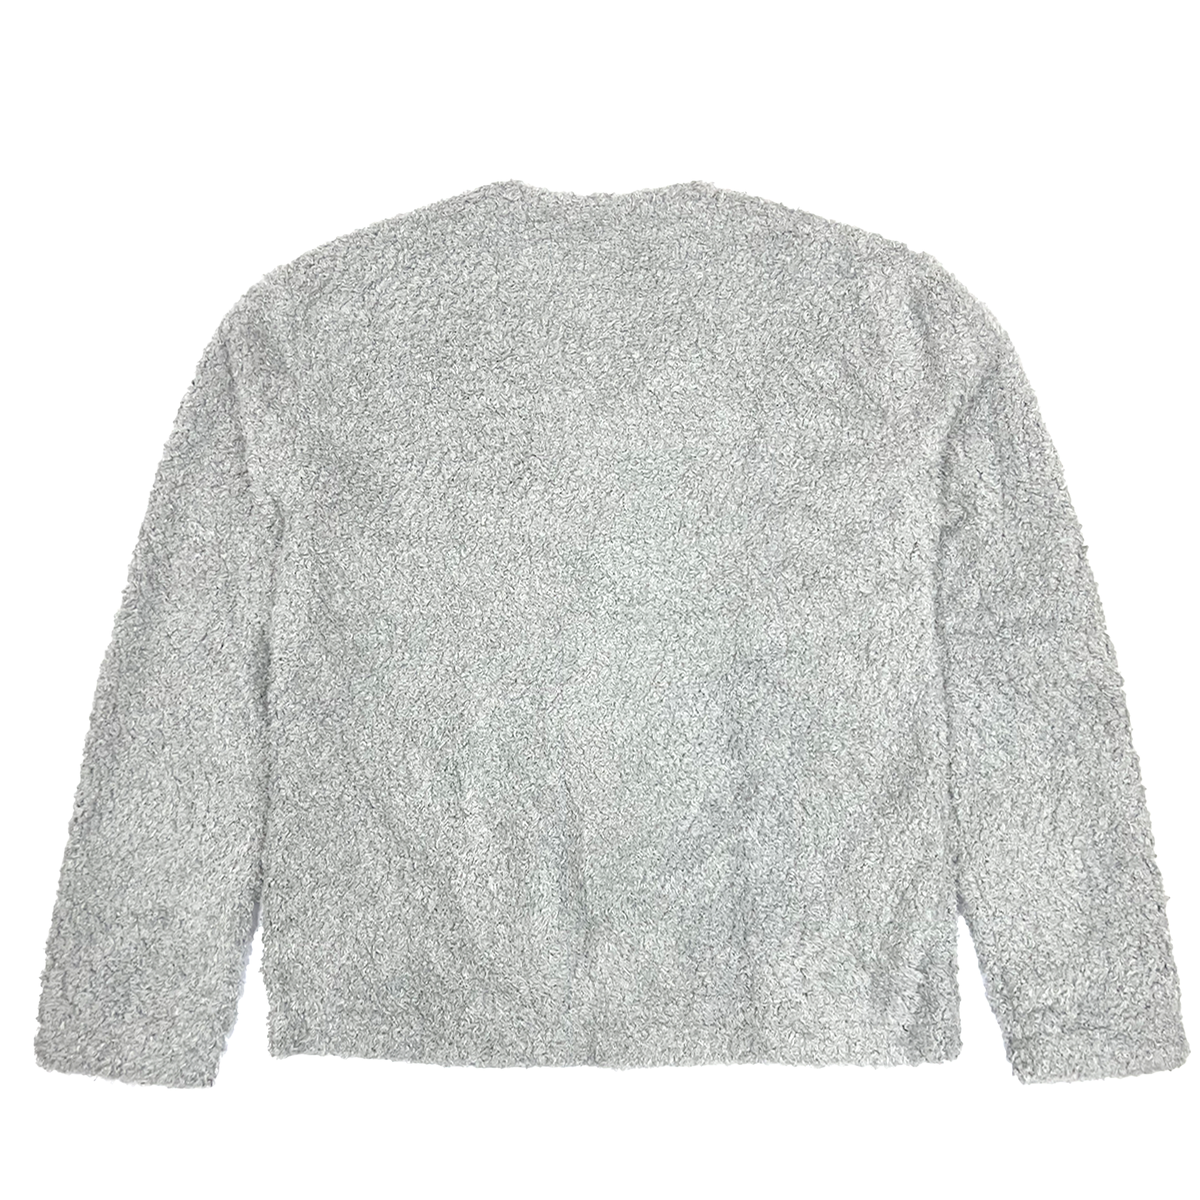 The Salvages 'Sublime' Teddy Cardigan in Grey